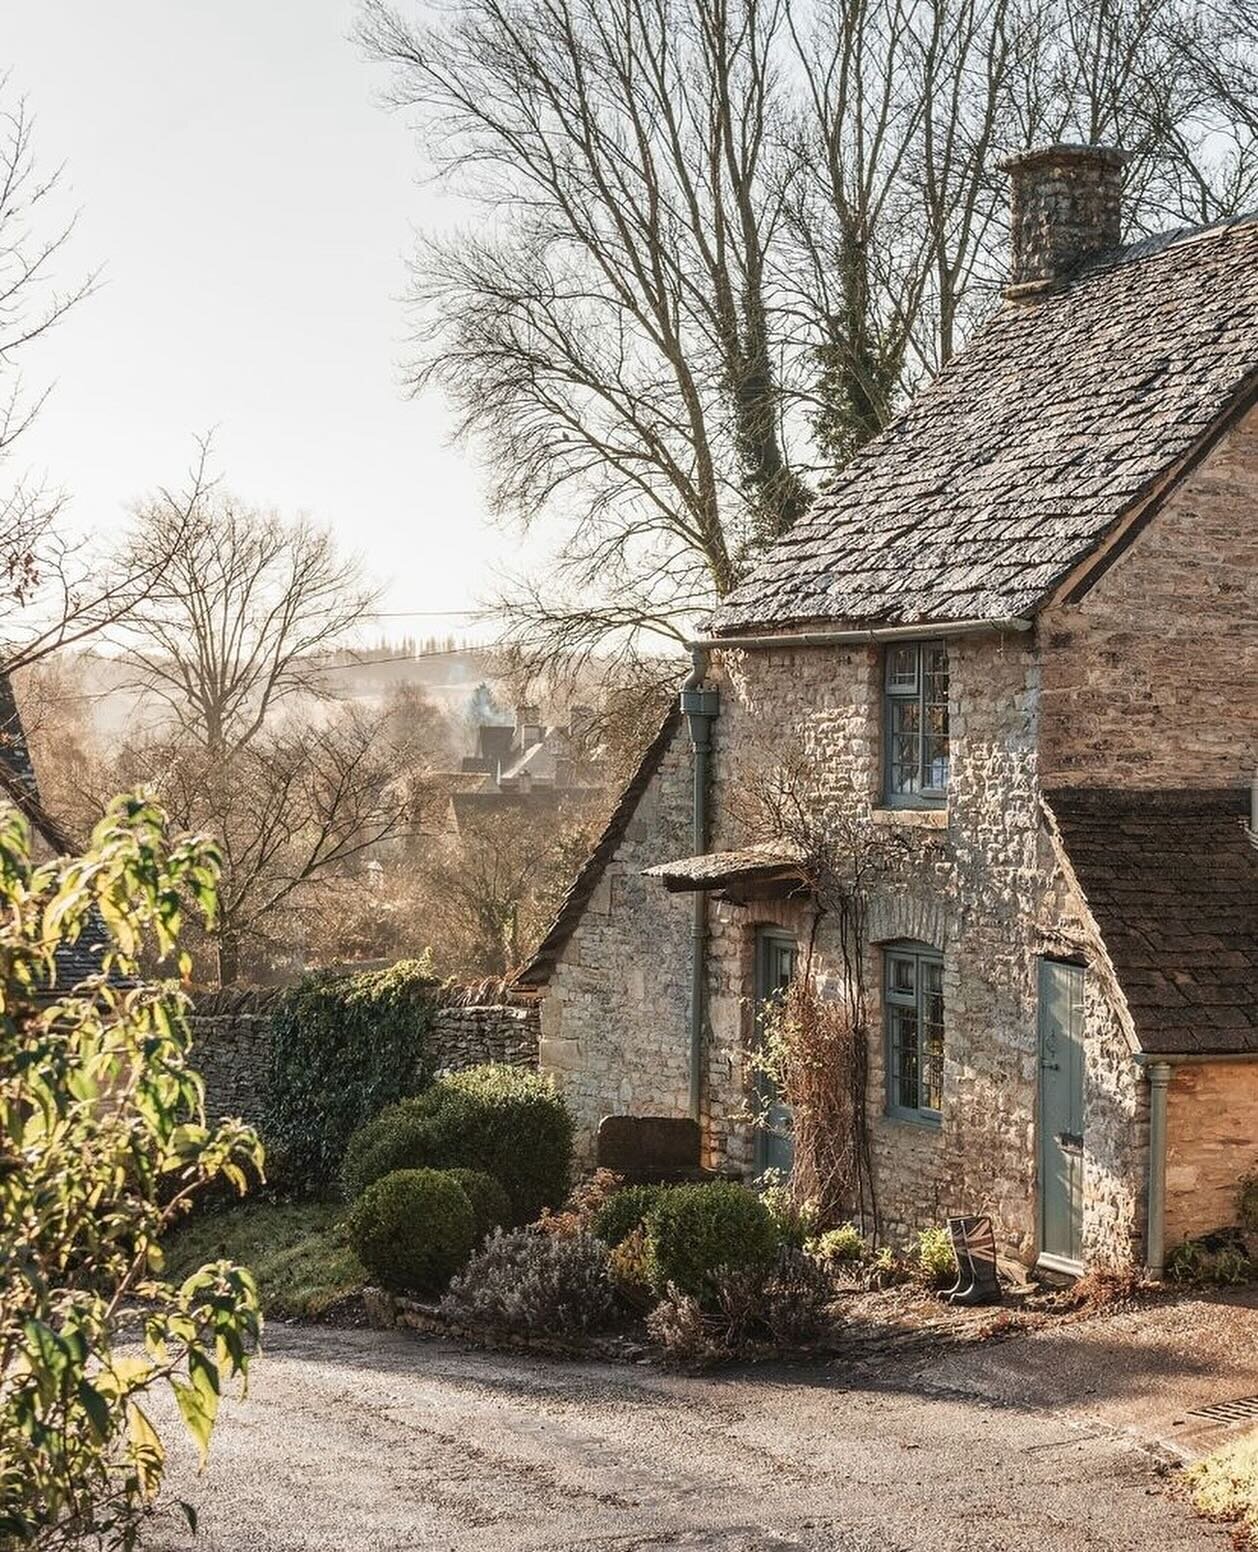 The best way to experience life as a local in The Cotswolds is by booking a self-catering stay in a Cotswolds village or town.

There is nothing like waking up on a brisk winters morning than in the cosy embrace of a charming Cotswold home. We&rsquo;